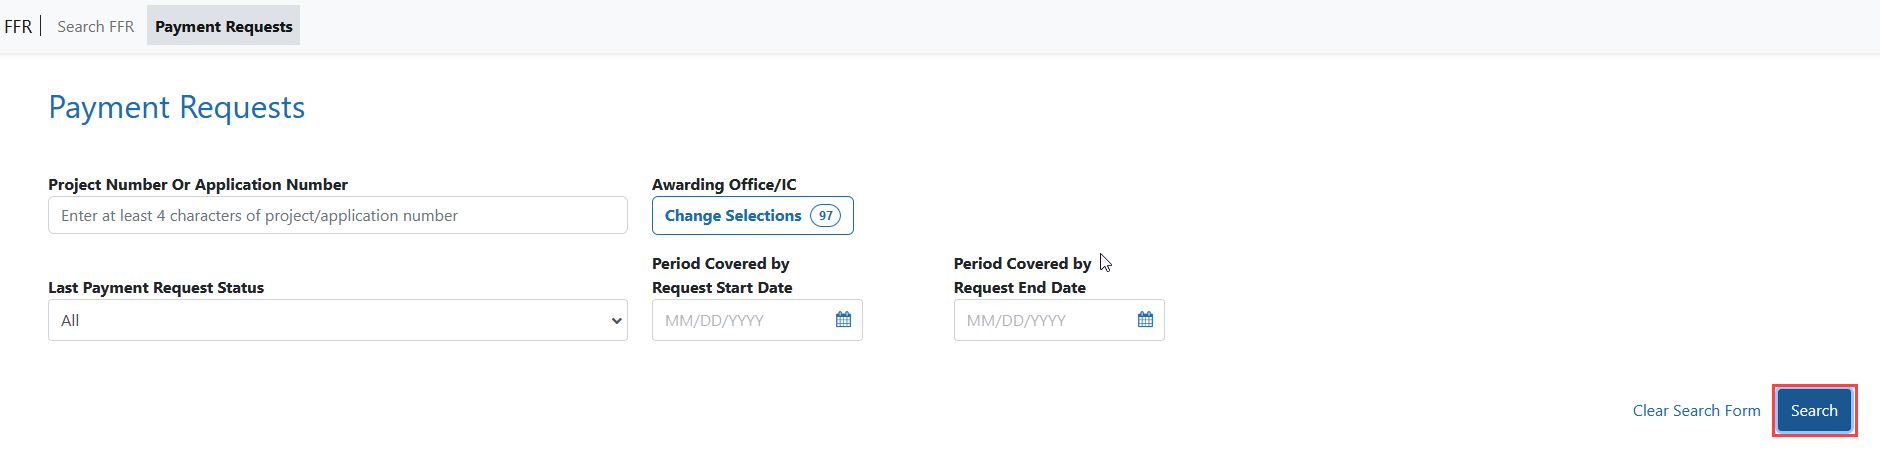 Payment Requests screen provides various search criteria and Search button to conduct a search